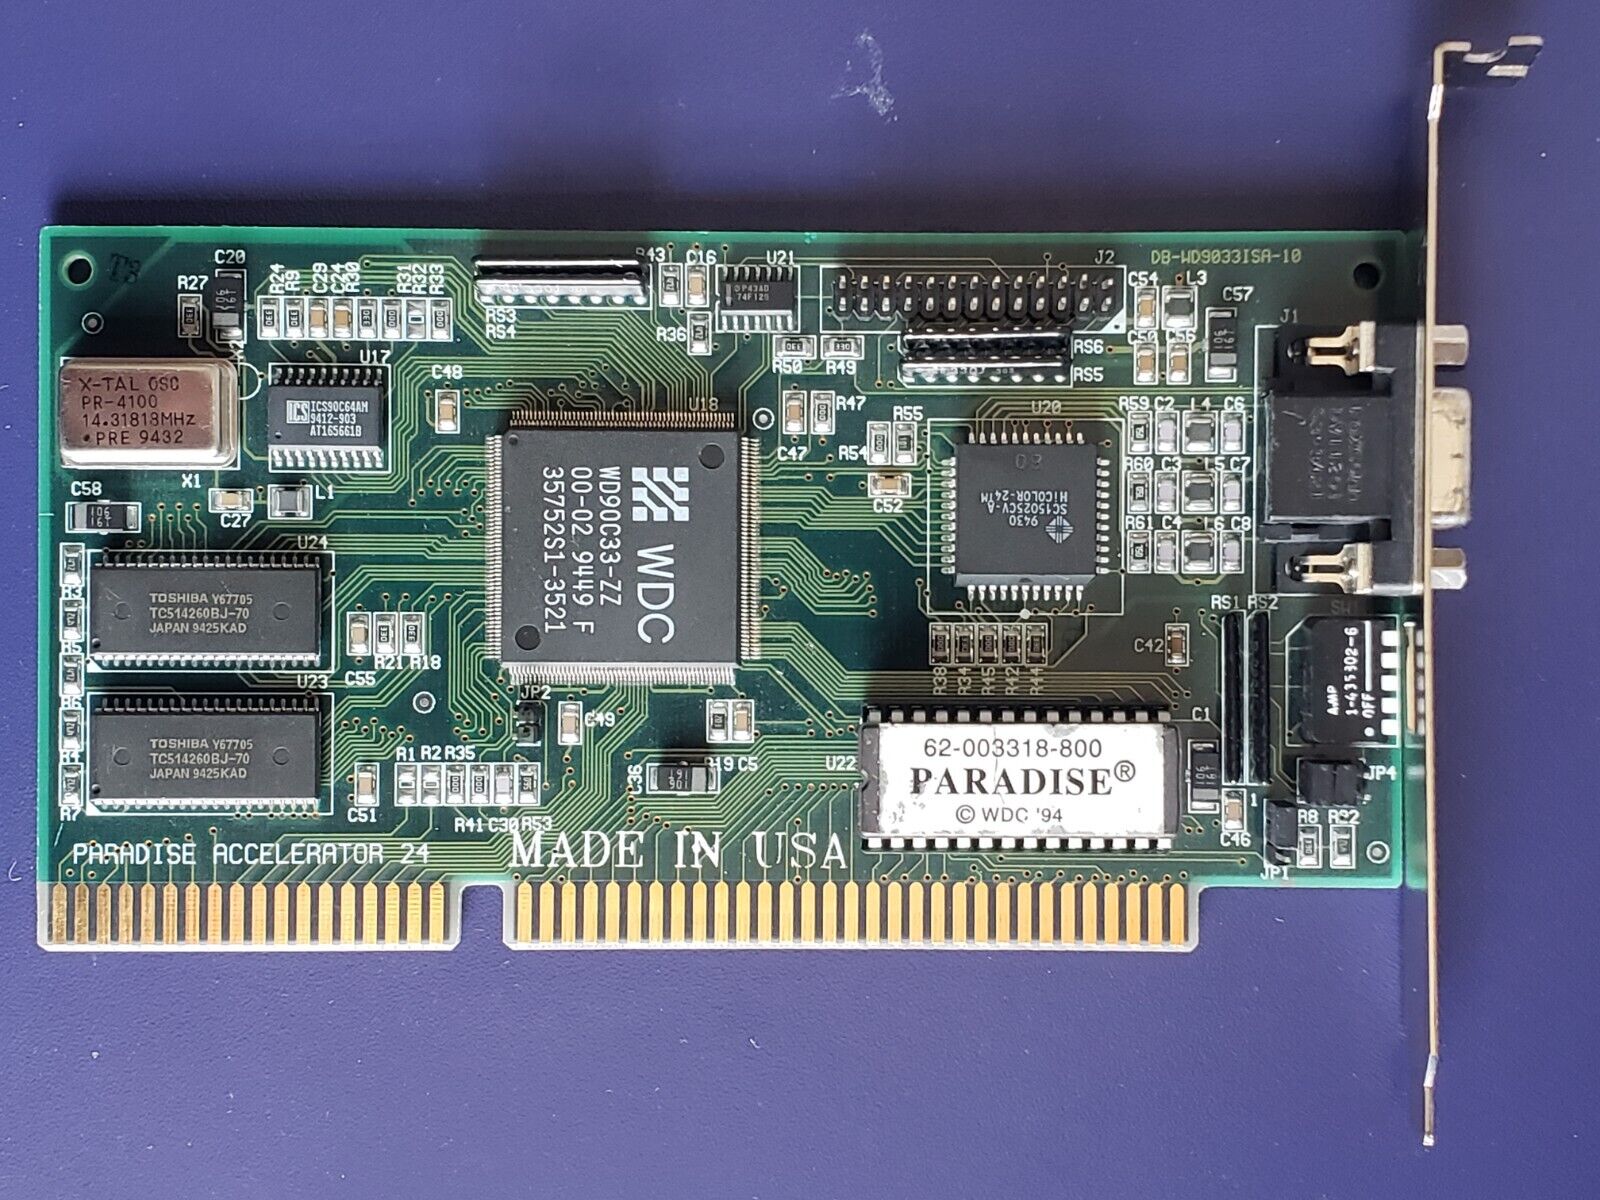 ISA Video Card, WD90C33-ZZ, 1mb (Paradise Accelerator 24) Vintage/ Retro Gaming